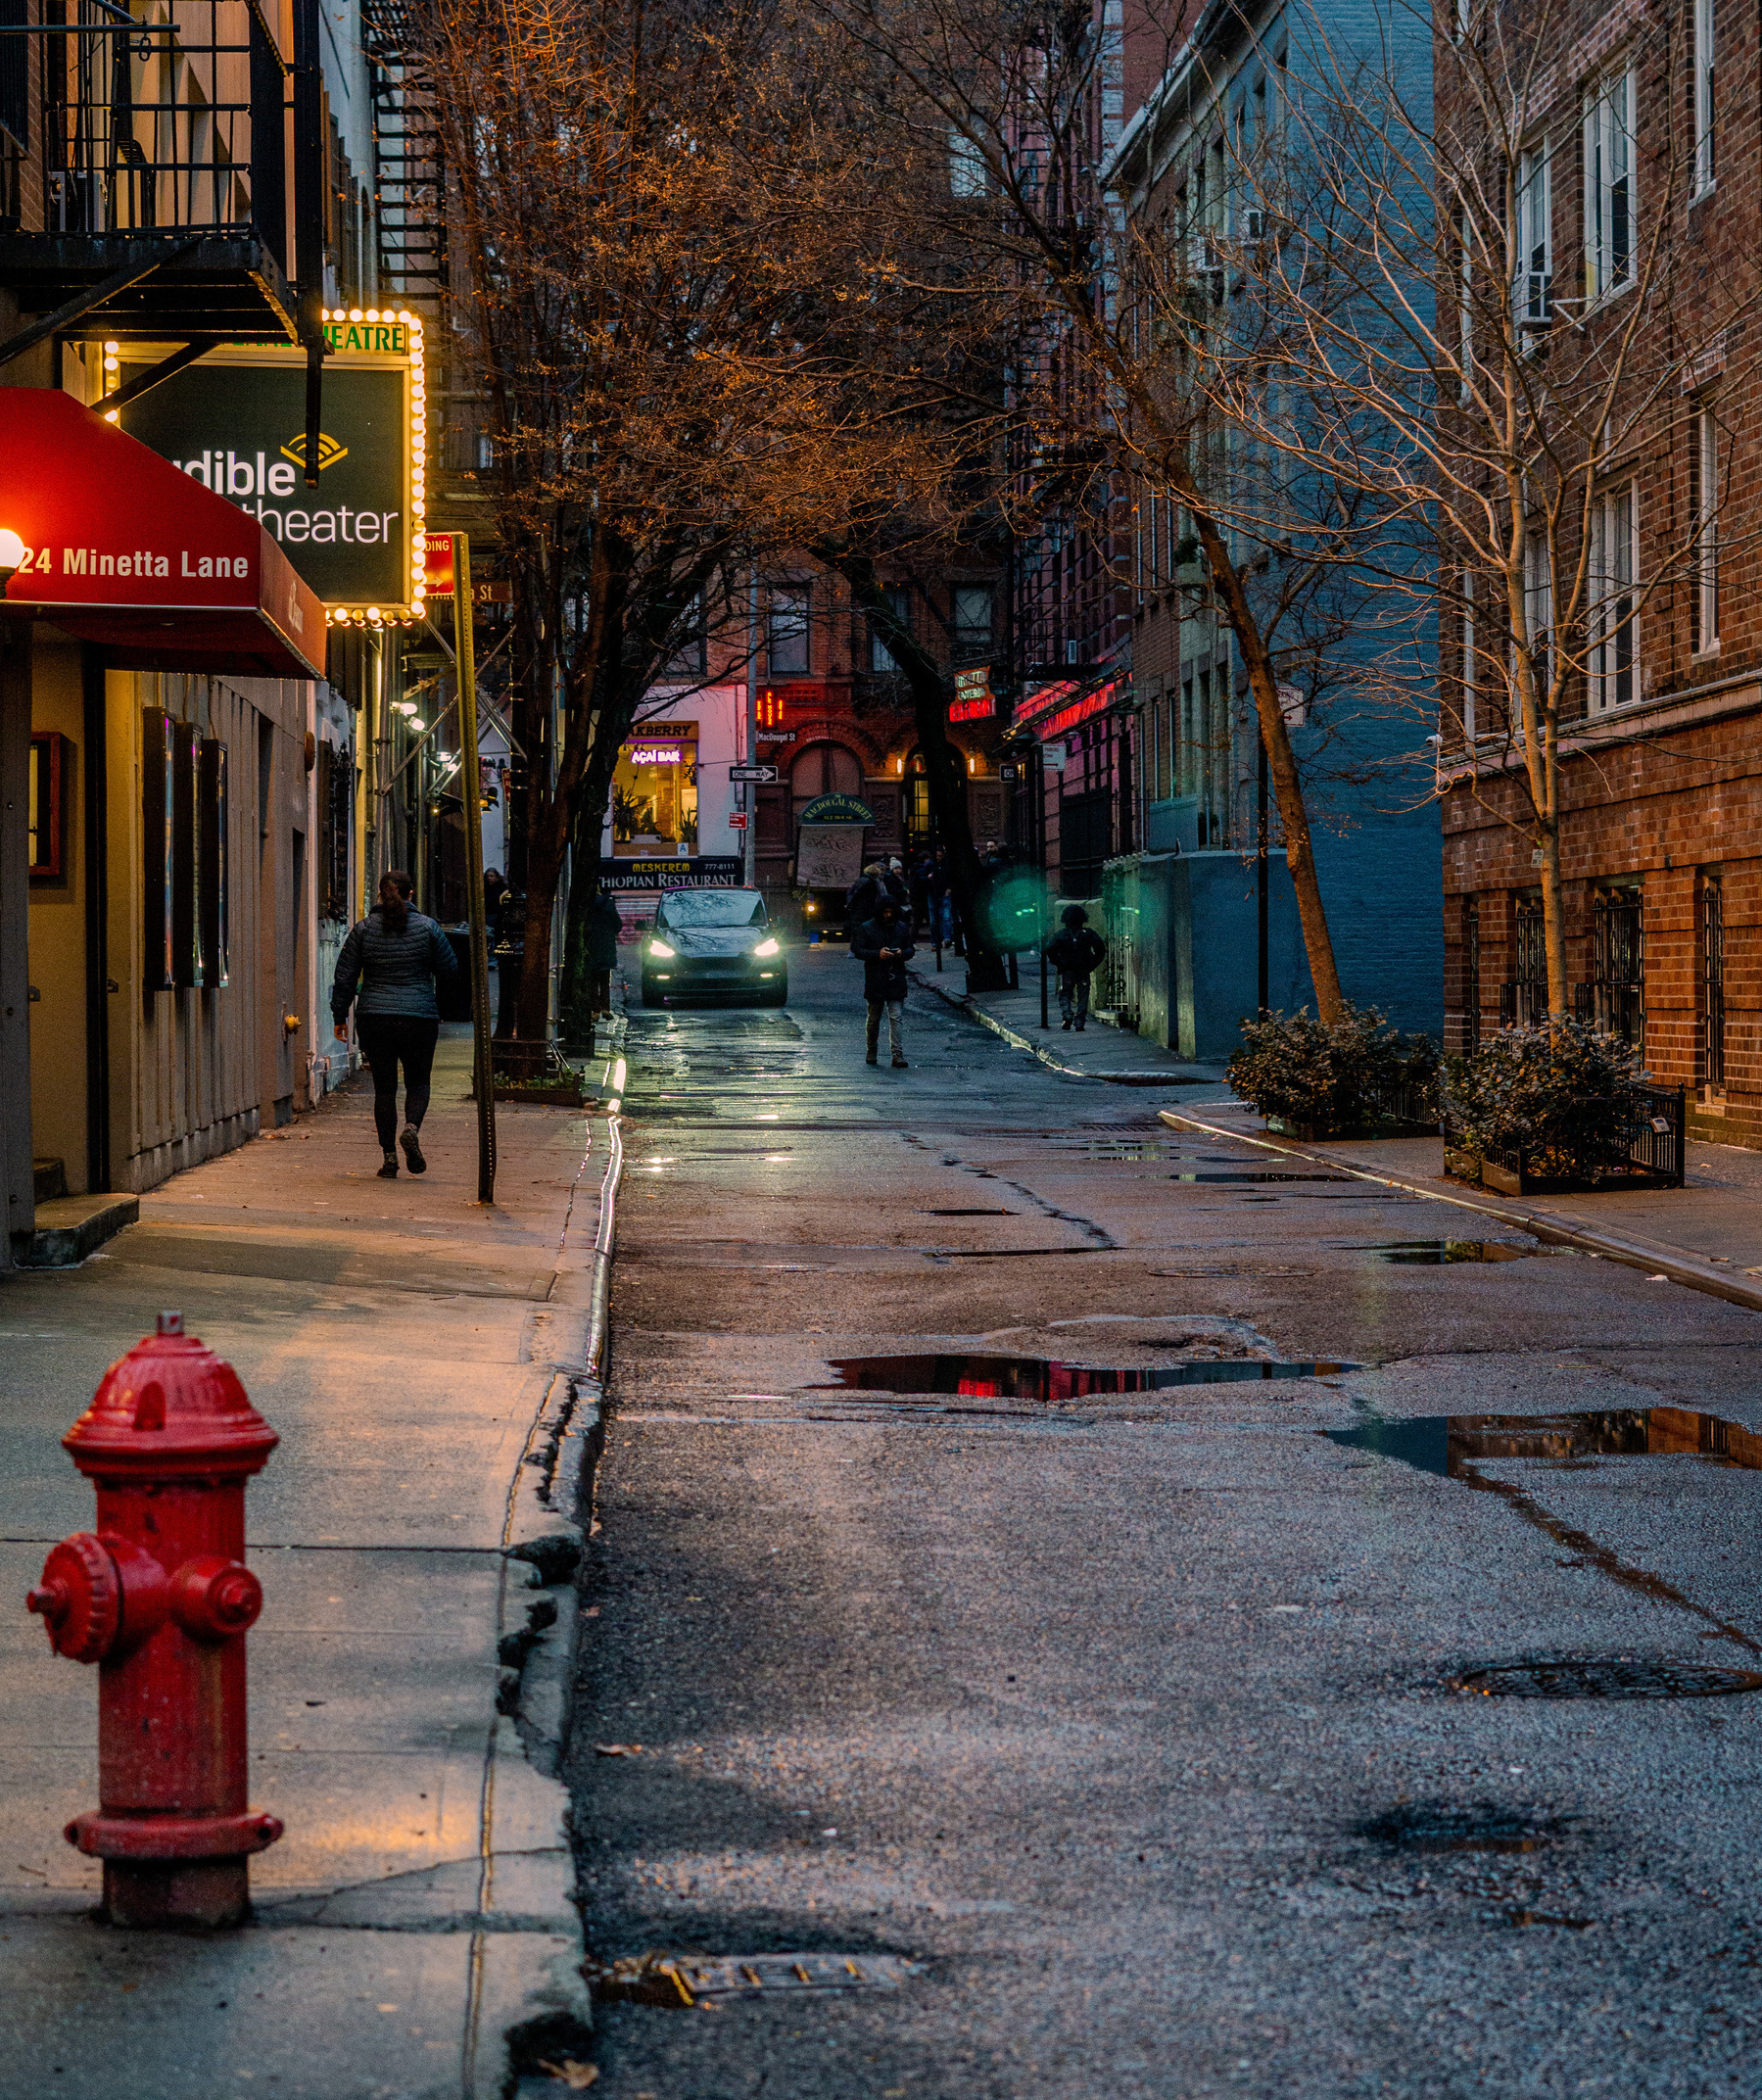 Minetta lane, off of 6th Ave. A red fire hydrant in the foreground, a street with puddles in the background, with lights from different shops further back